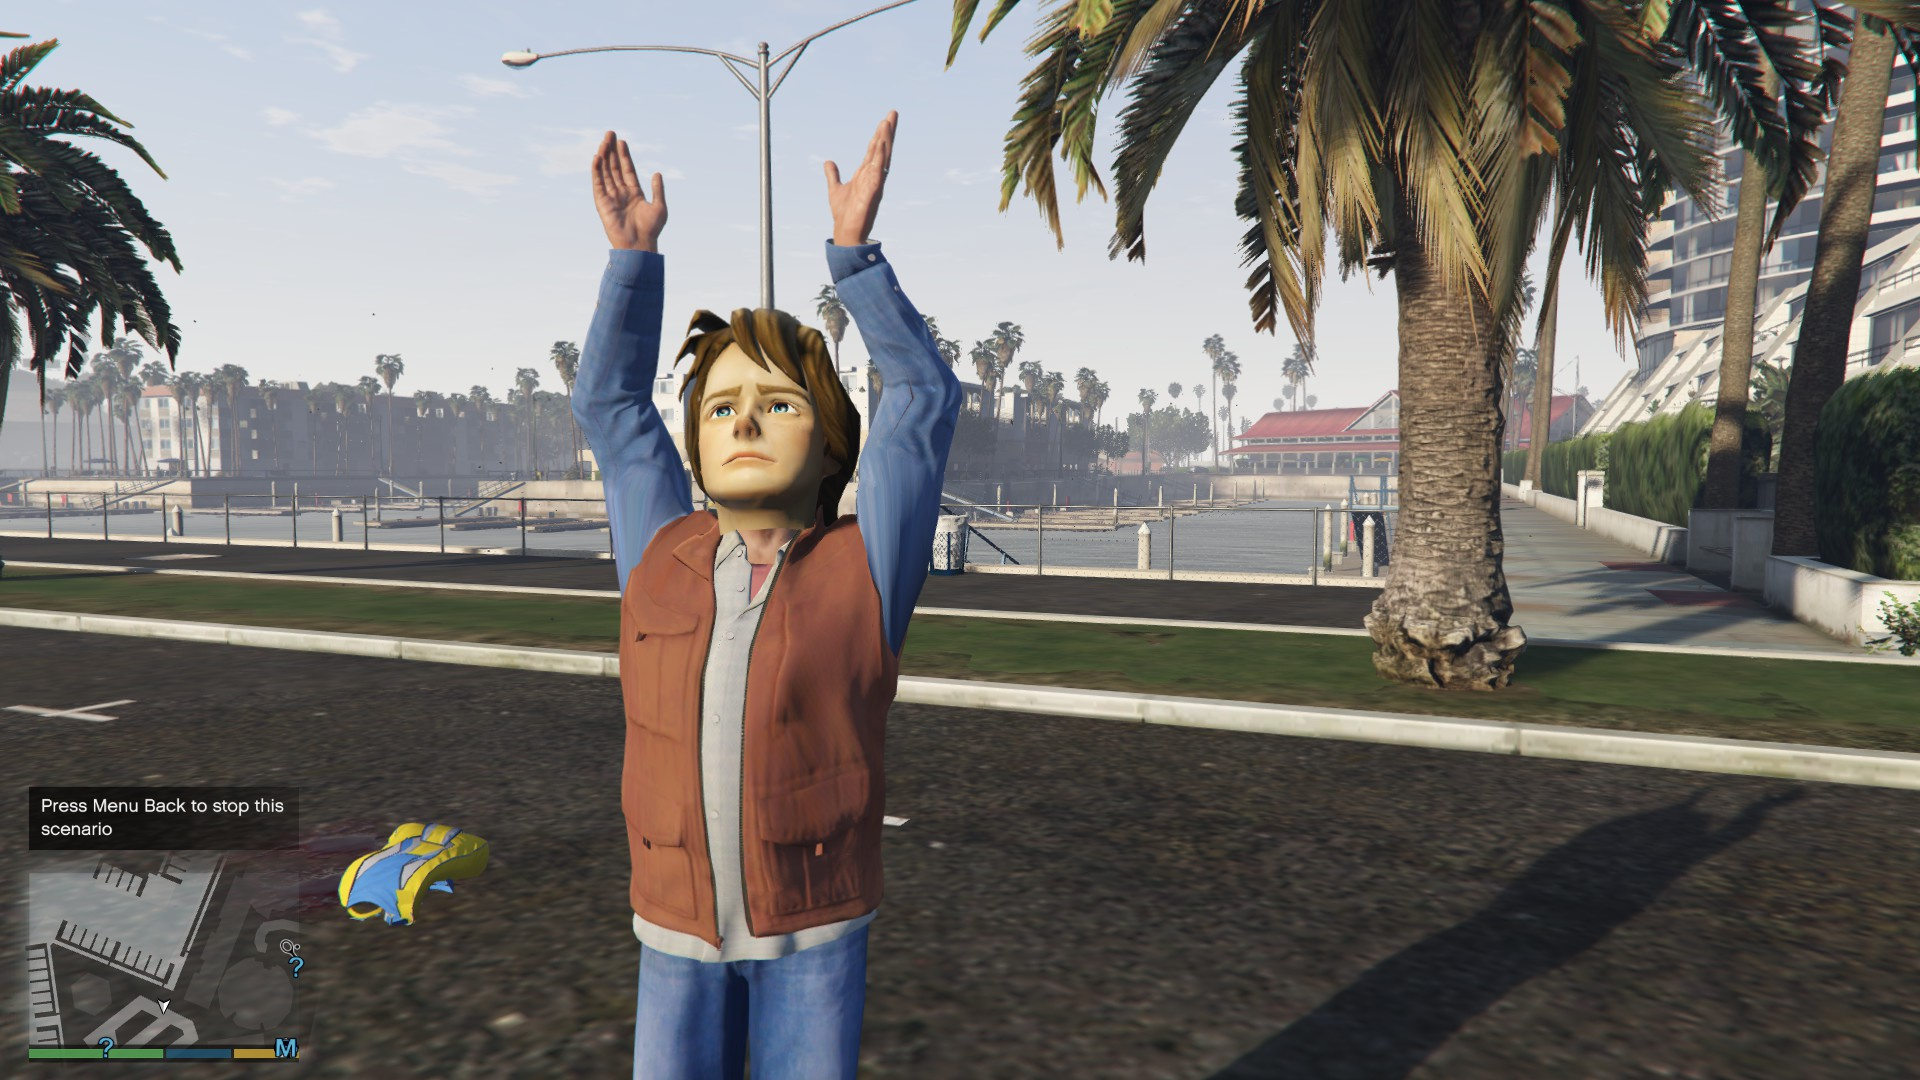 Back To The Future Marty Mcfly Mask Gta5 Mods Com Images, Photos, Reviews